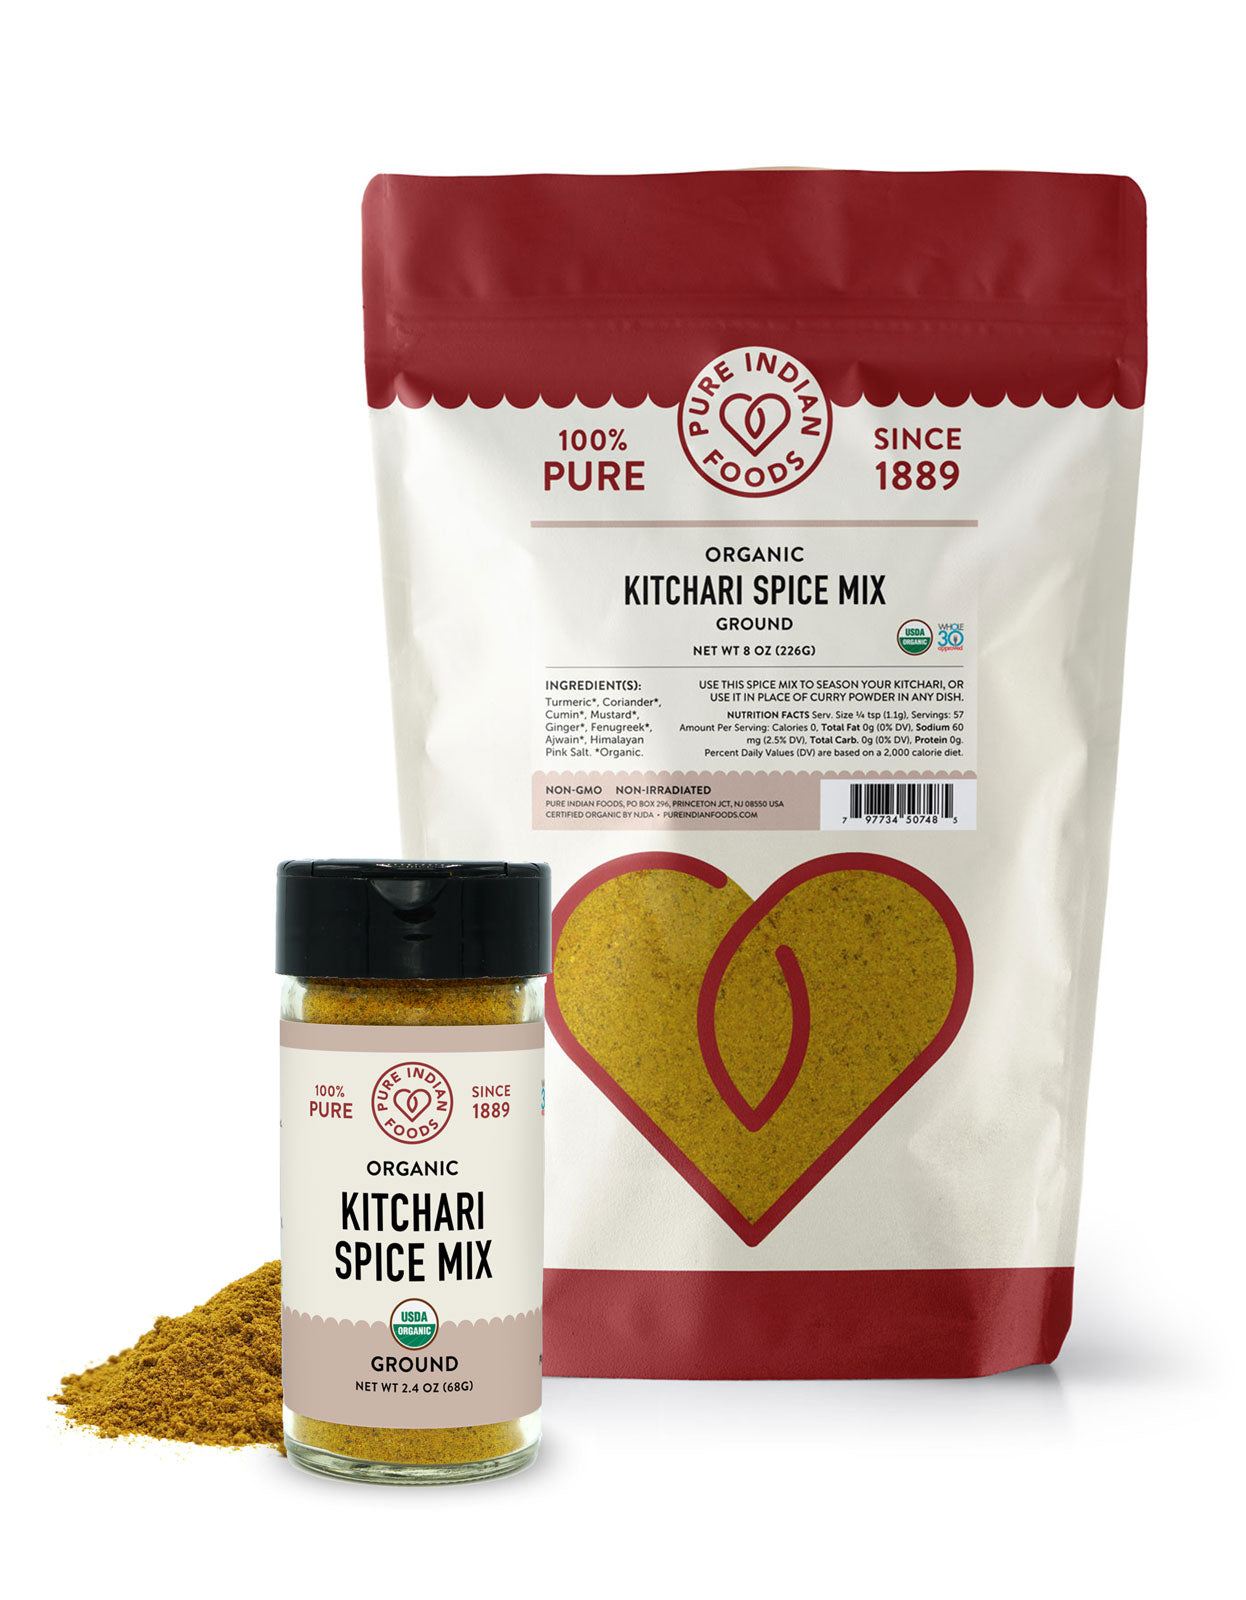 Organic Kitchari Spice Mix from Pure Indian Foods, in both an 8oz bag and 2.4oz glass bottle